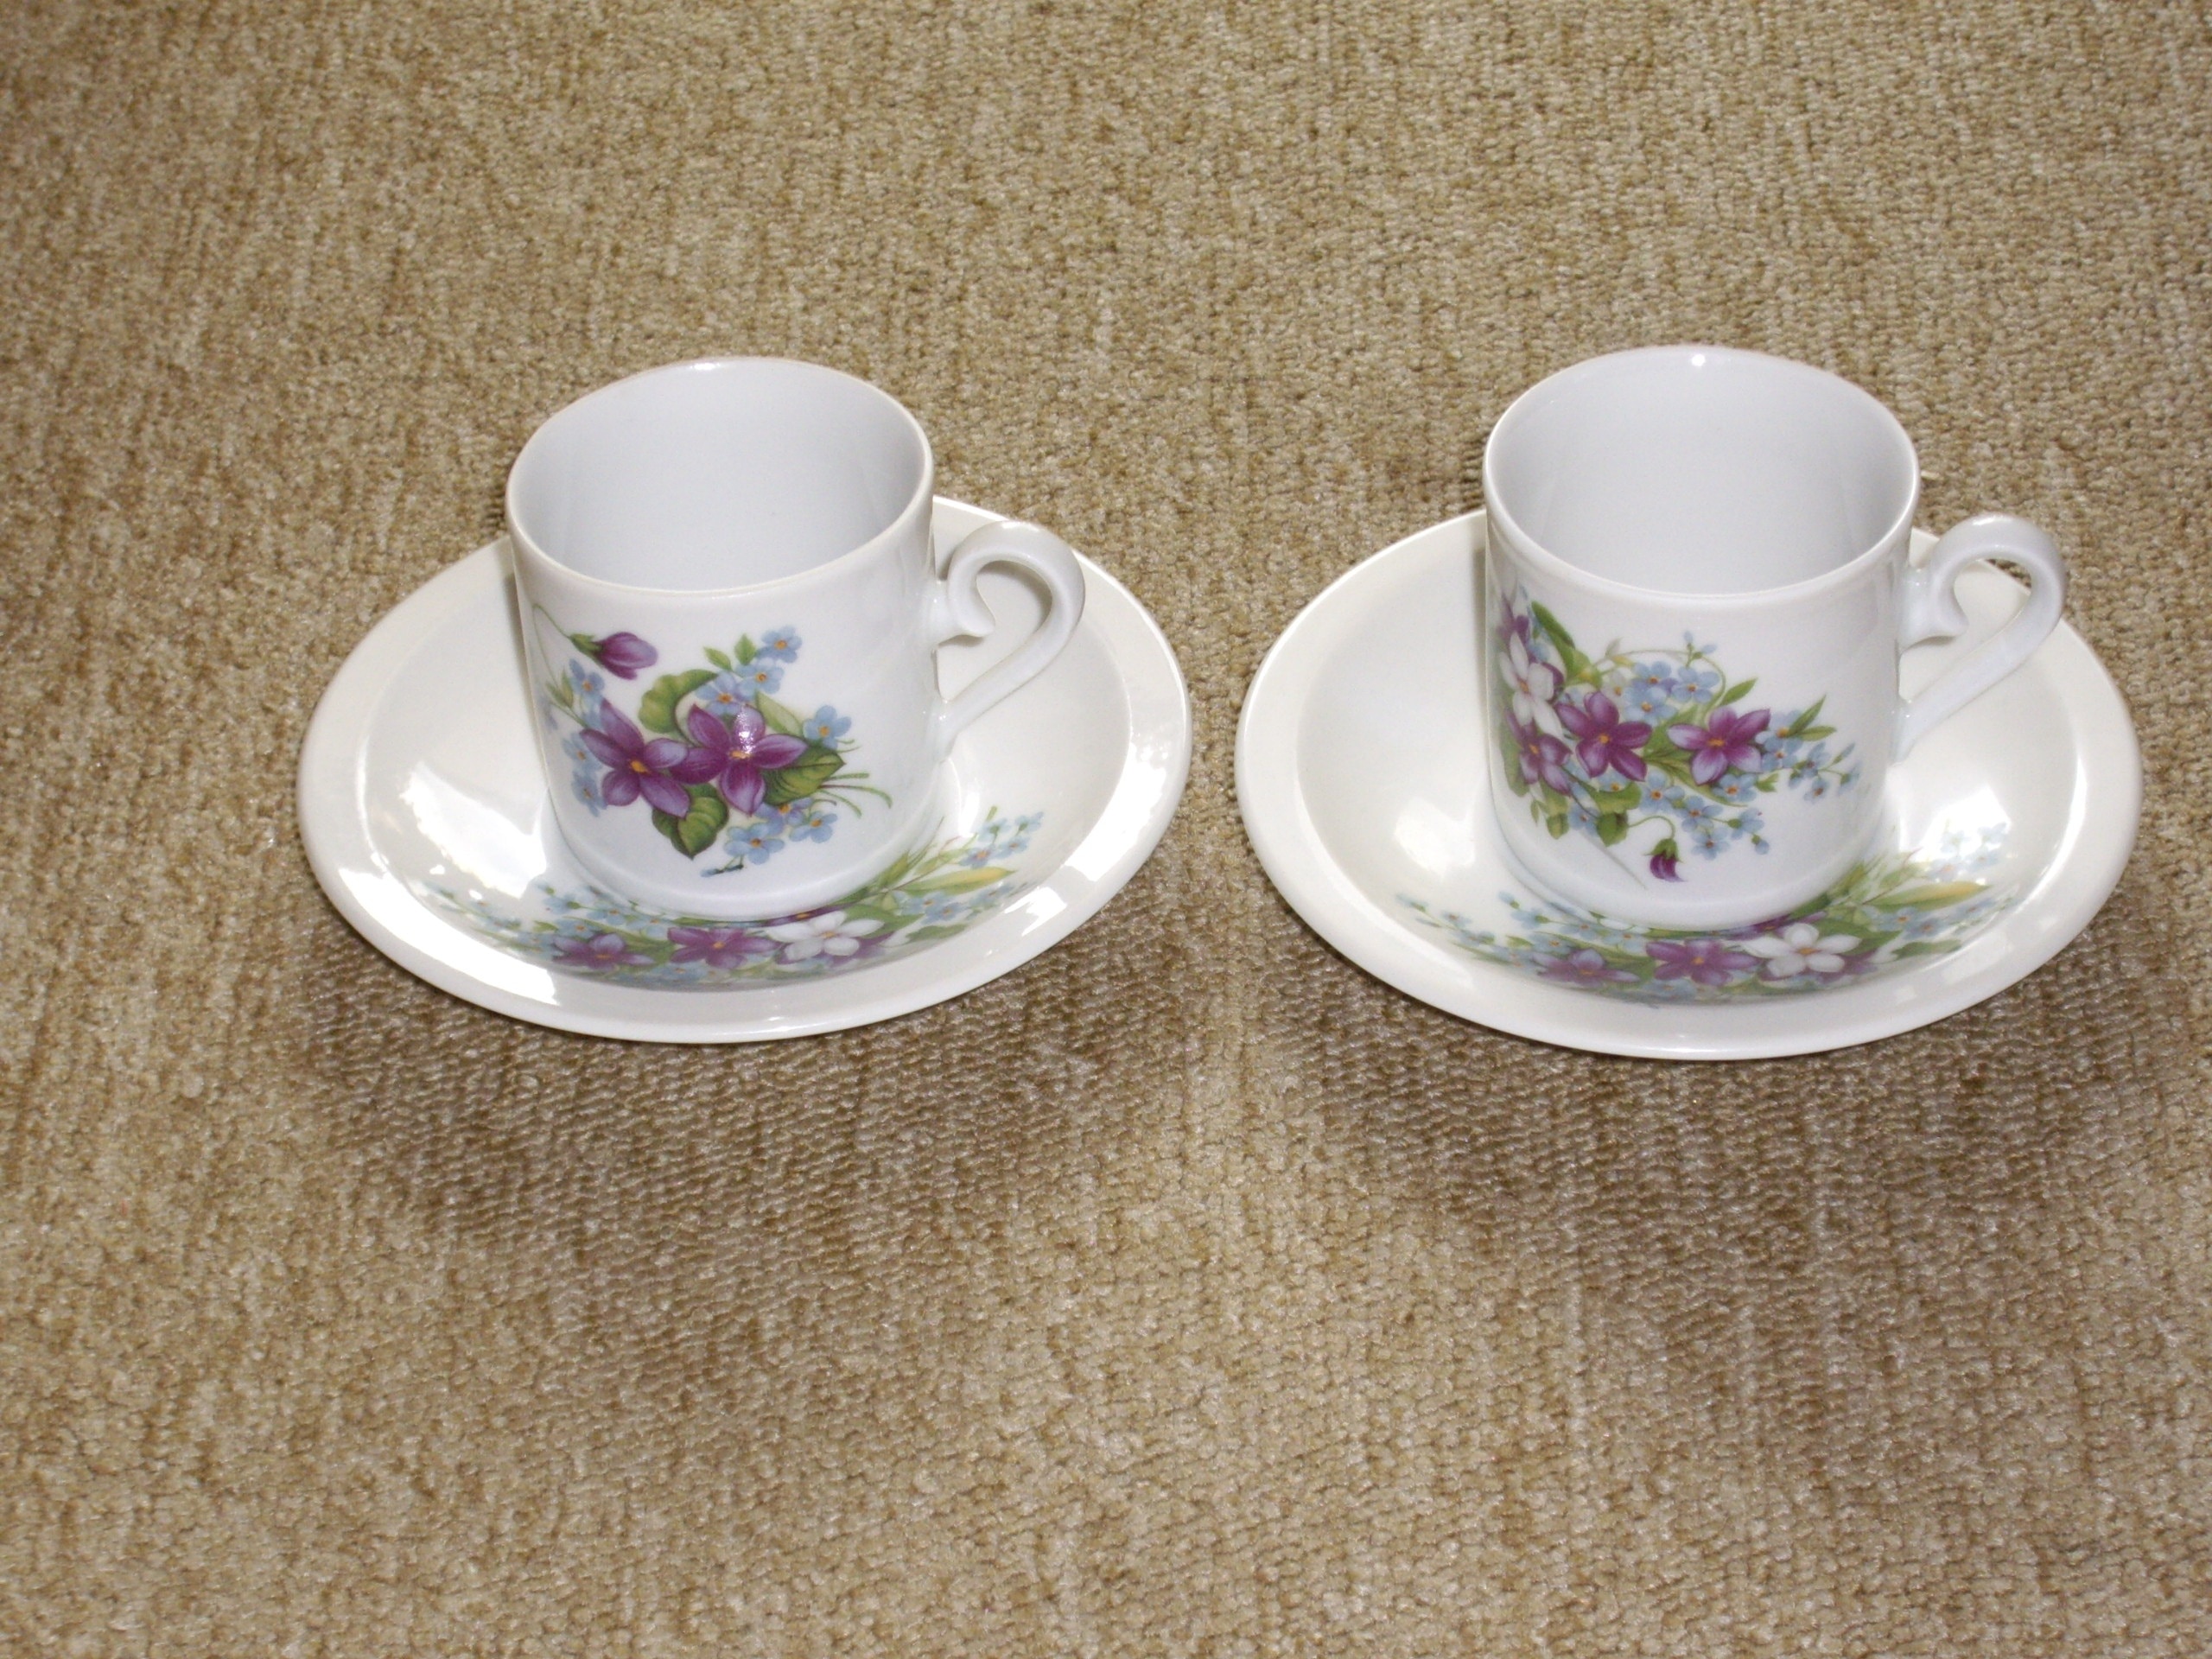 2 white and pink floral teacup and saucer set